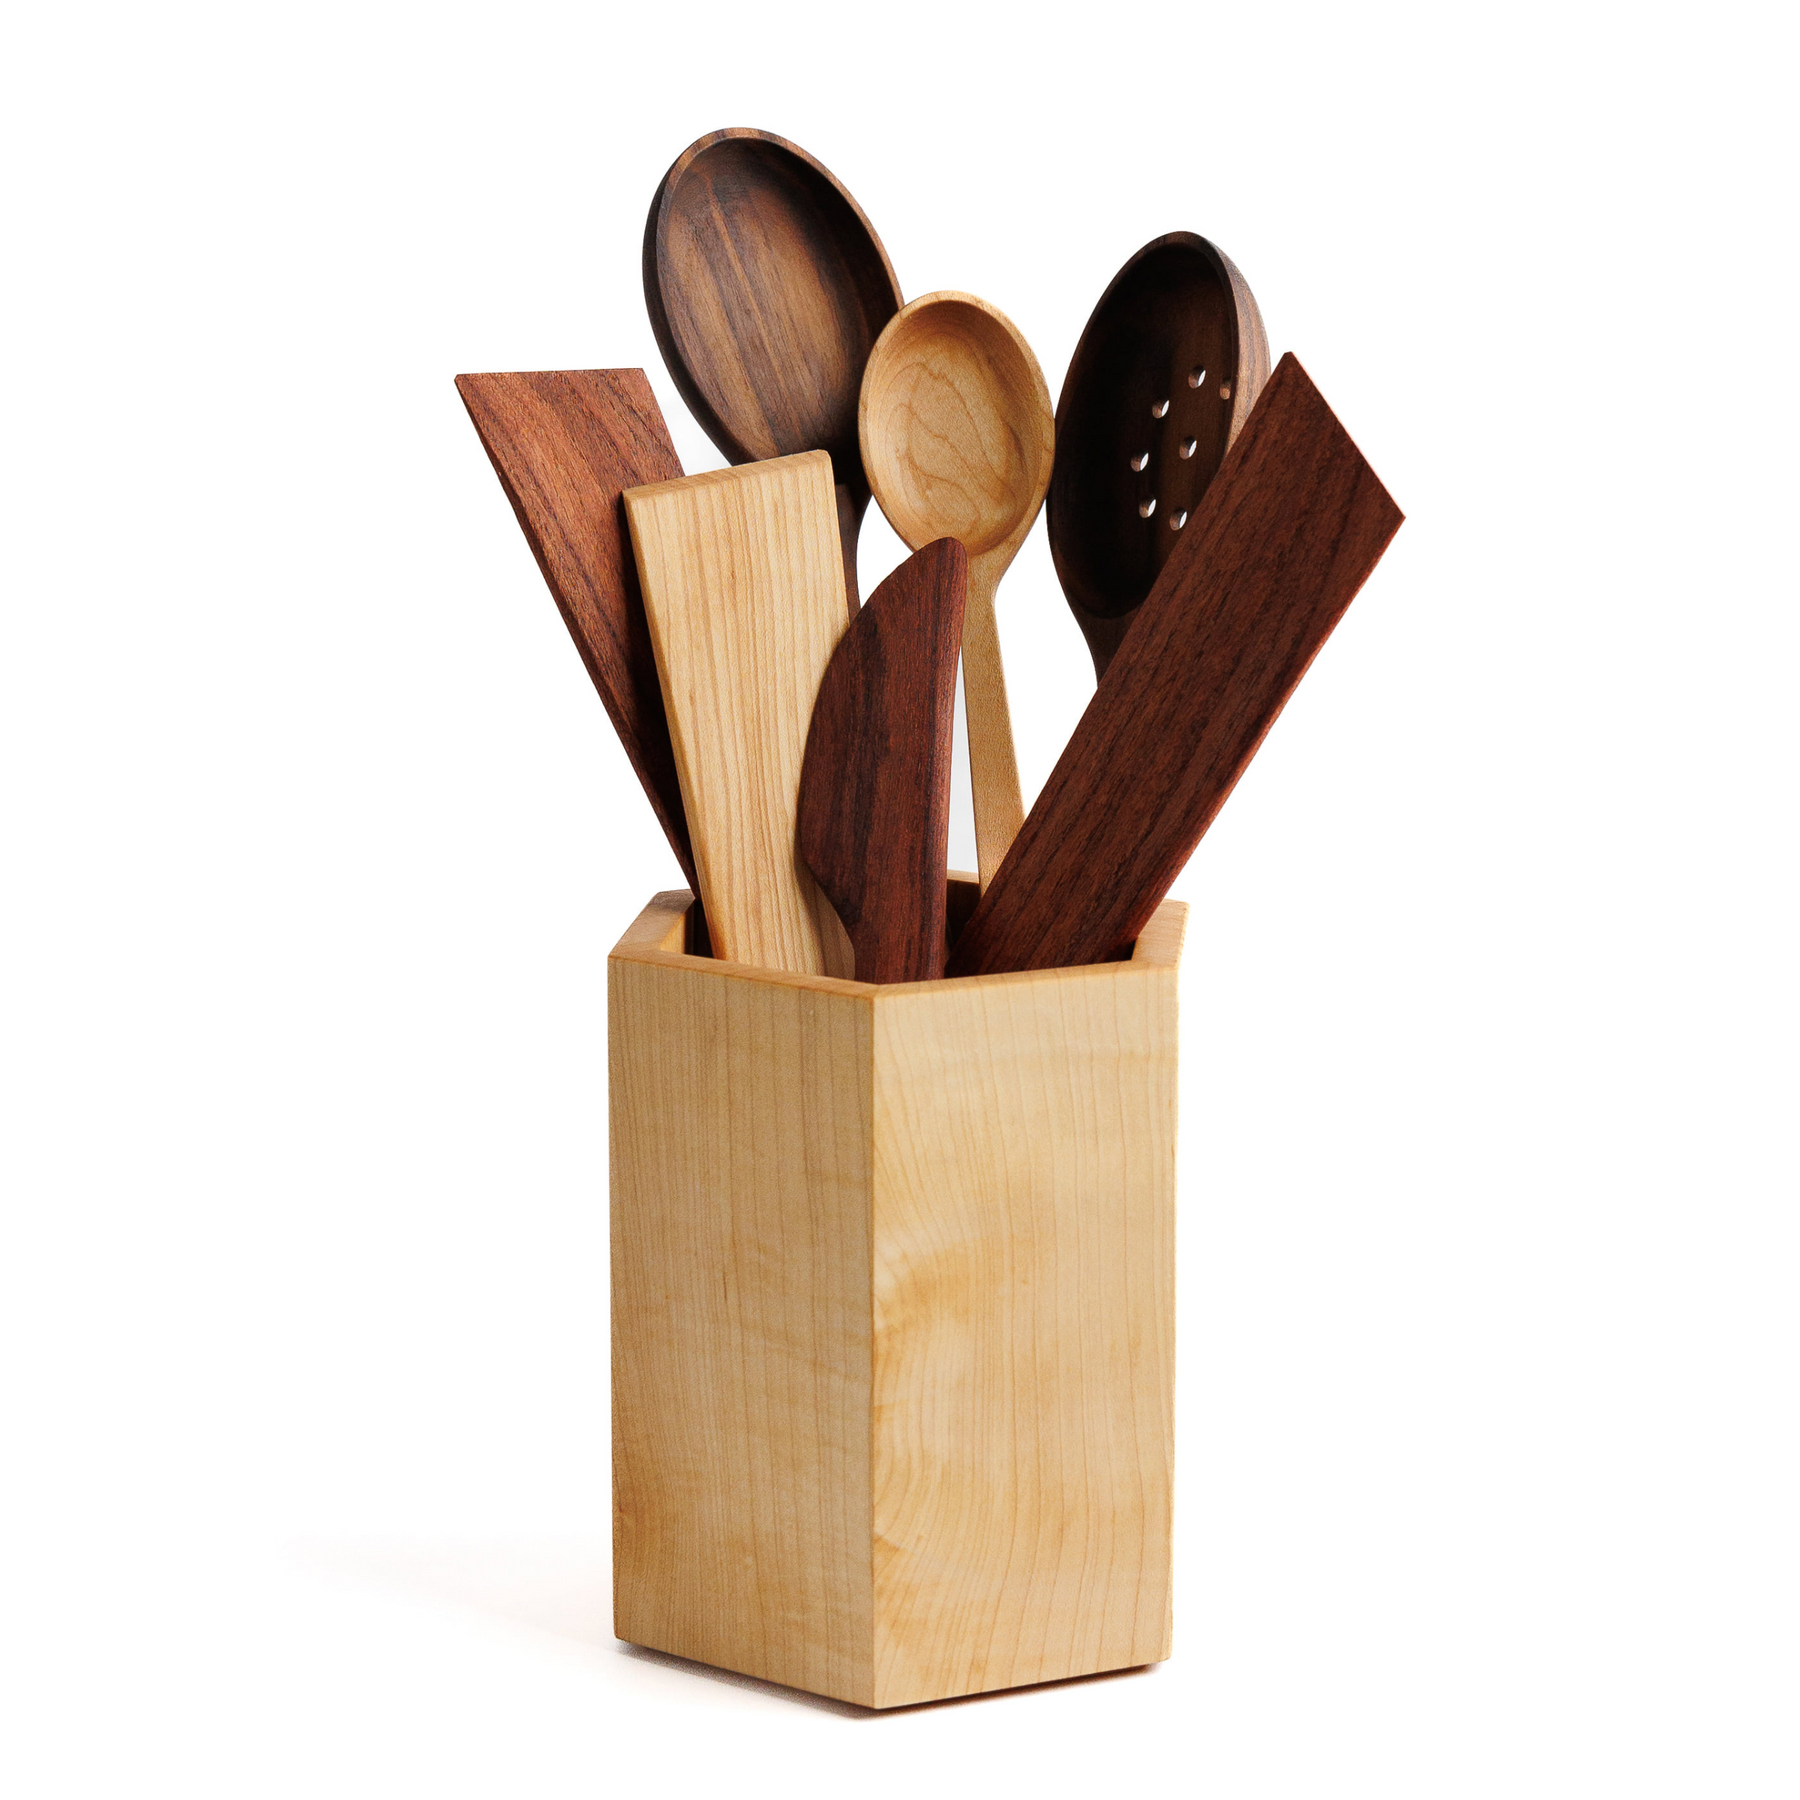 NEW! 8-Piece Wooden Utensil Set with Holder